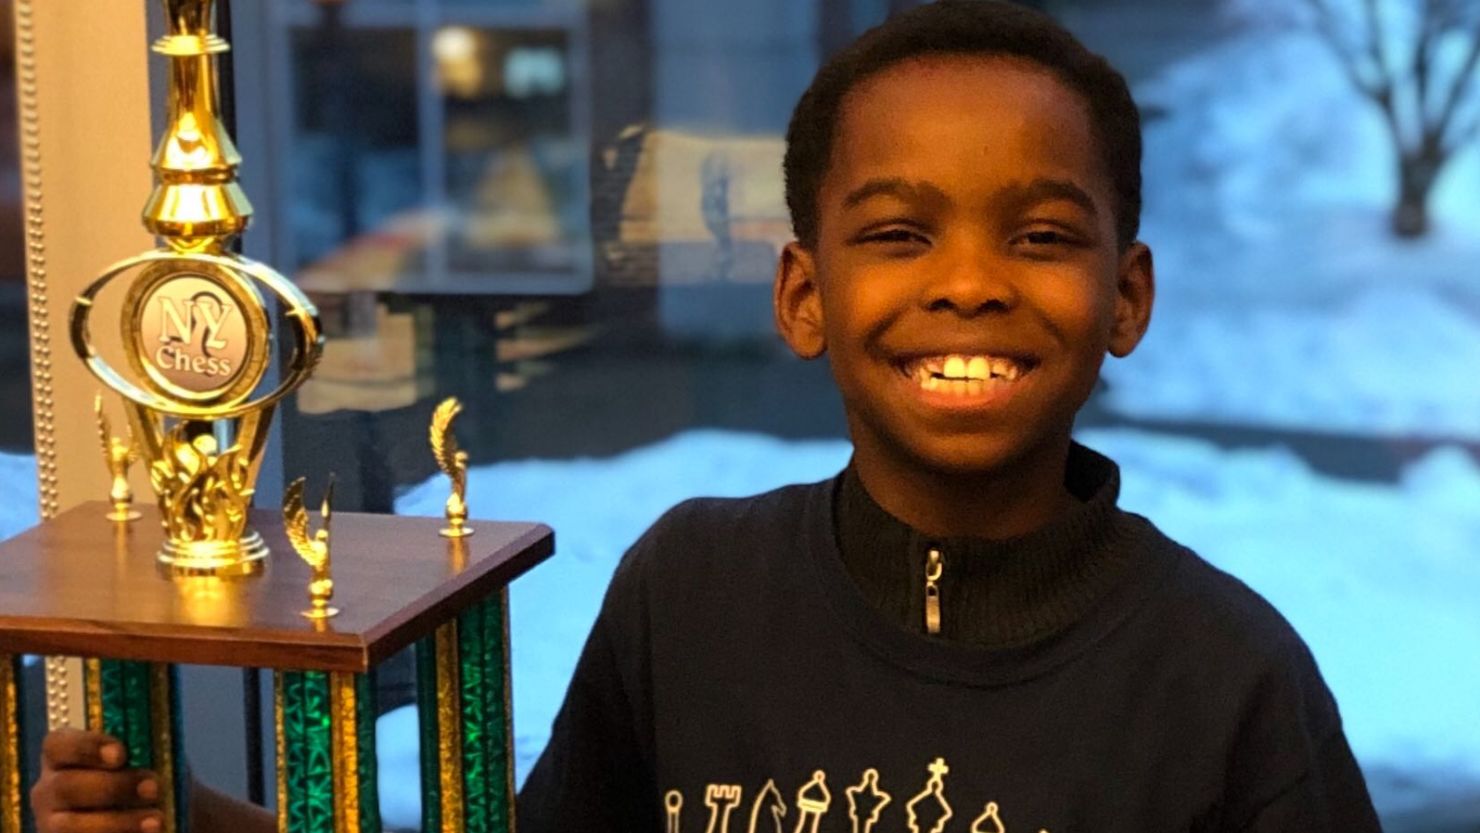 Tanitoluwa (Tani) Adewumi only learned to play chess about a year ago, but he won the New York State Scholastic Primary Championship in his age bracket. 